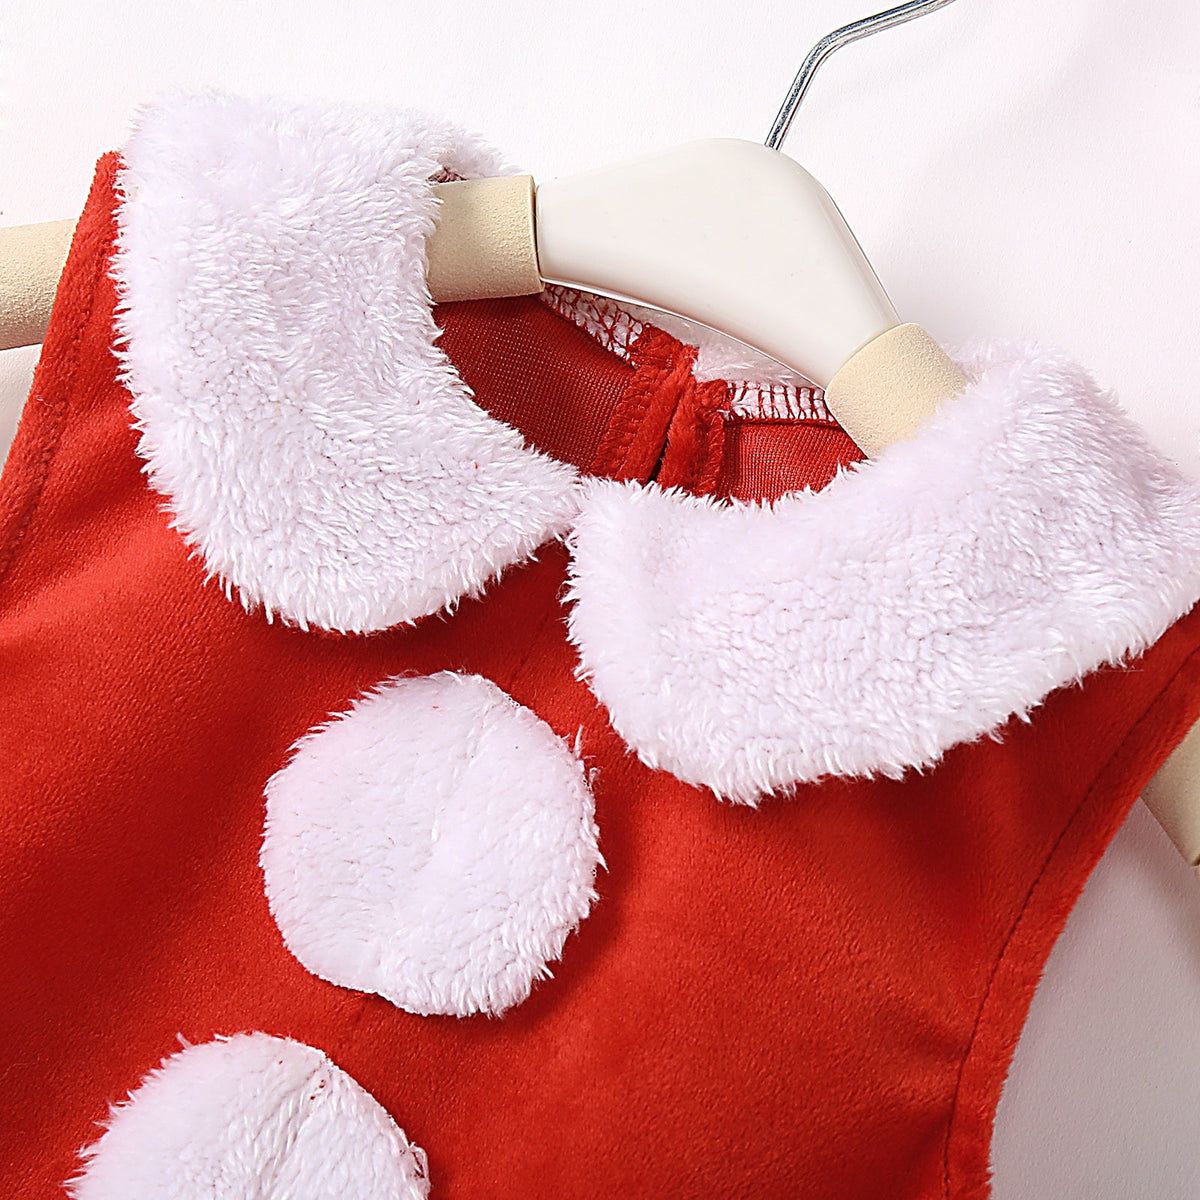 Christmas Santa Claus Costume Dress For Baby